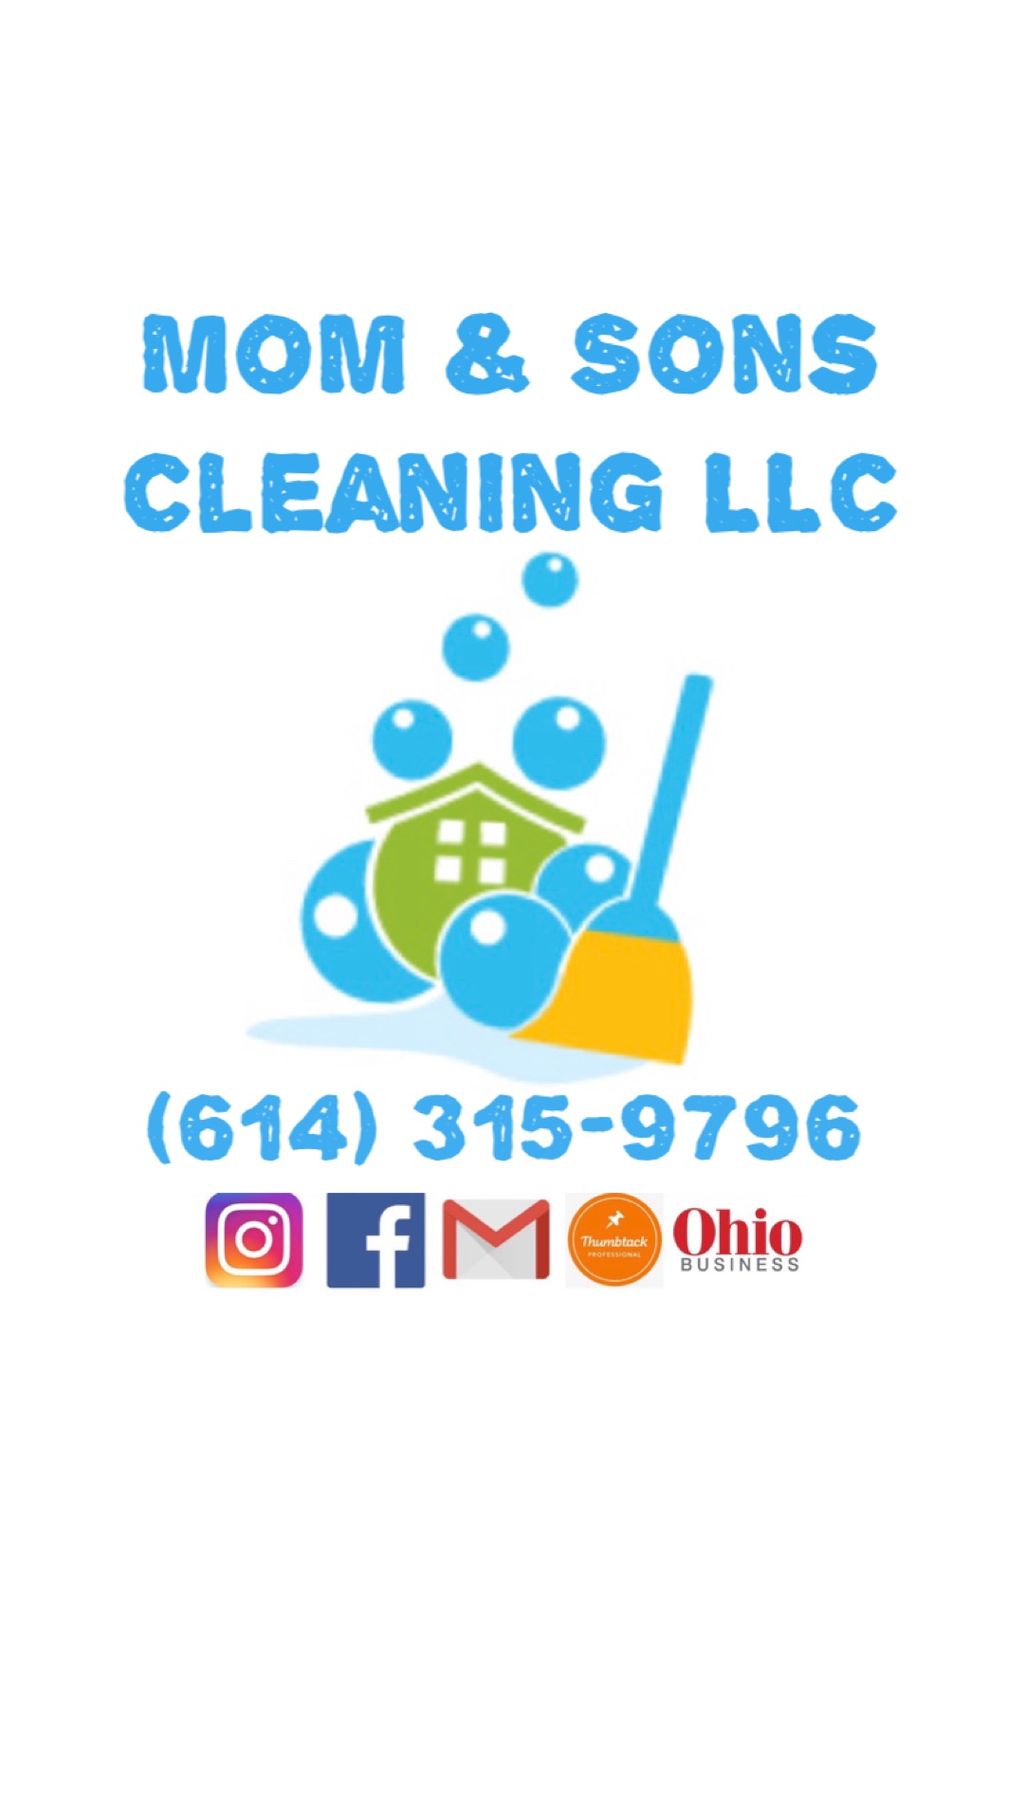 Mom & Sons Cleaning LLC